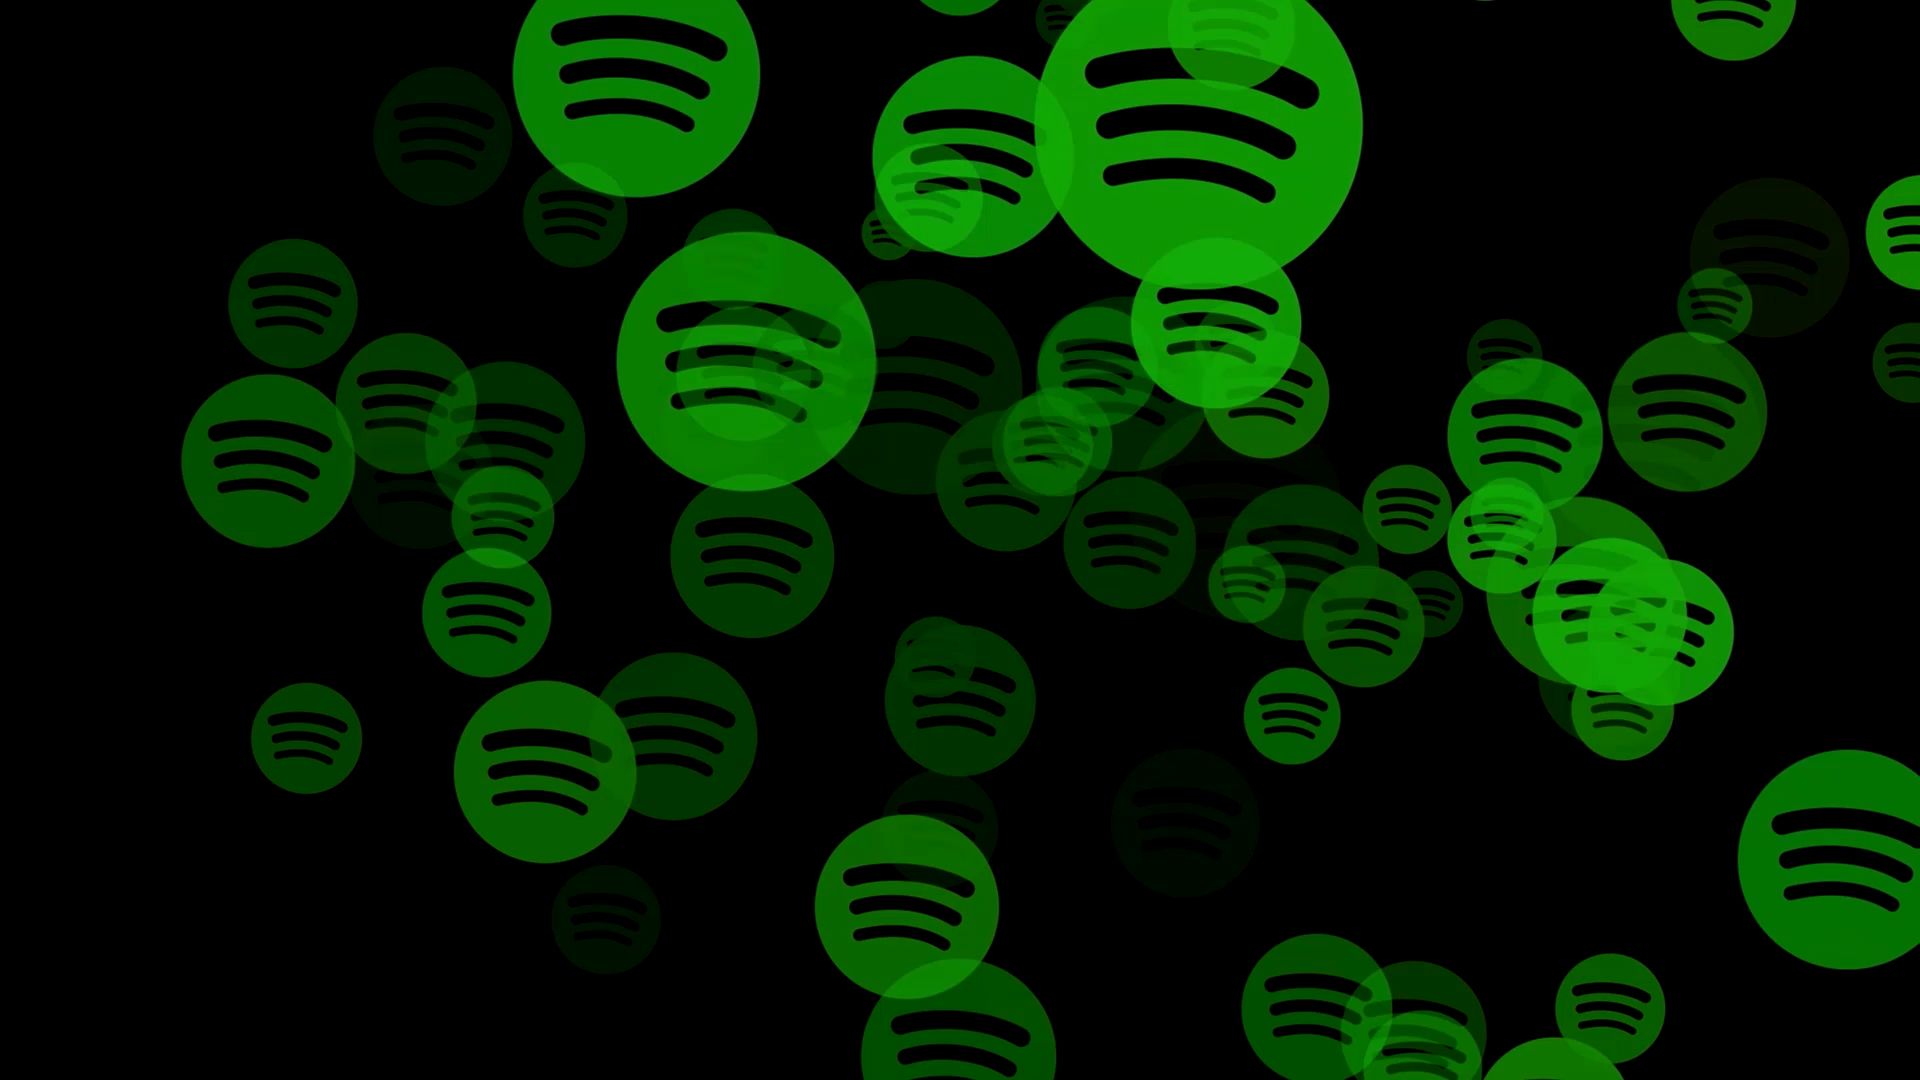 Spotify Wallpapers